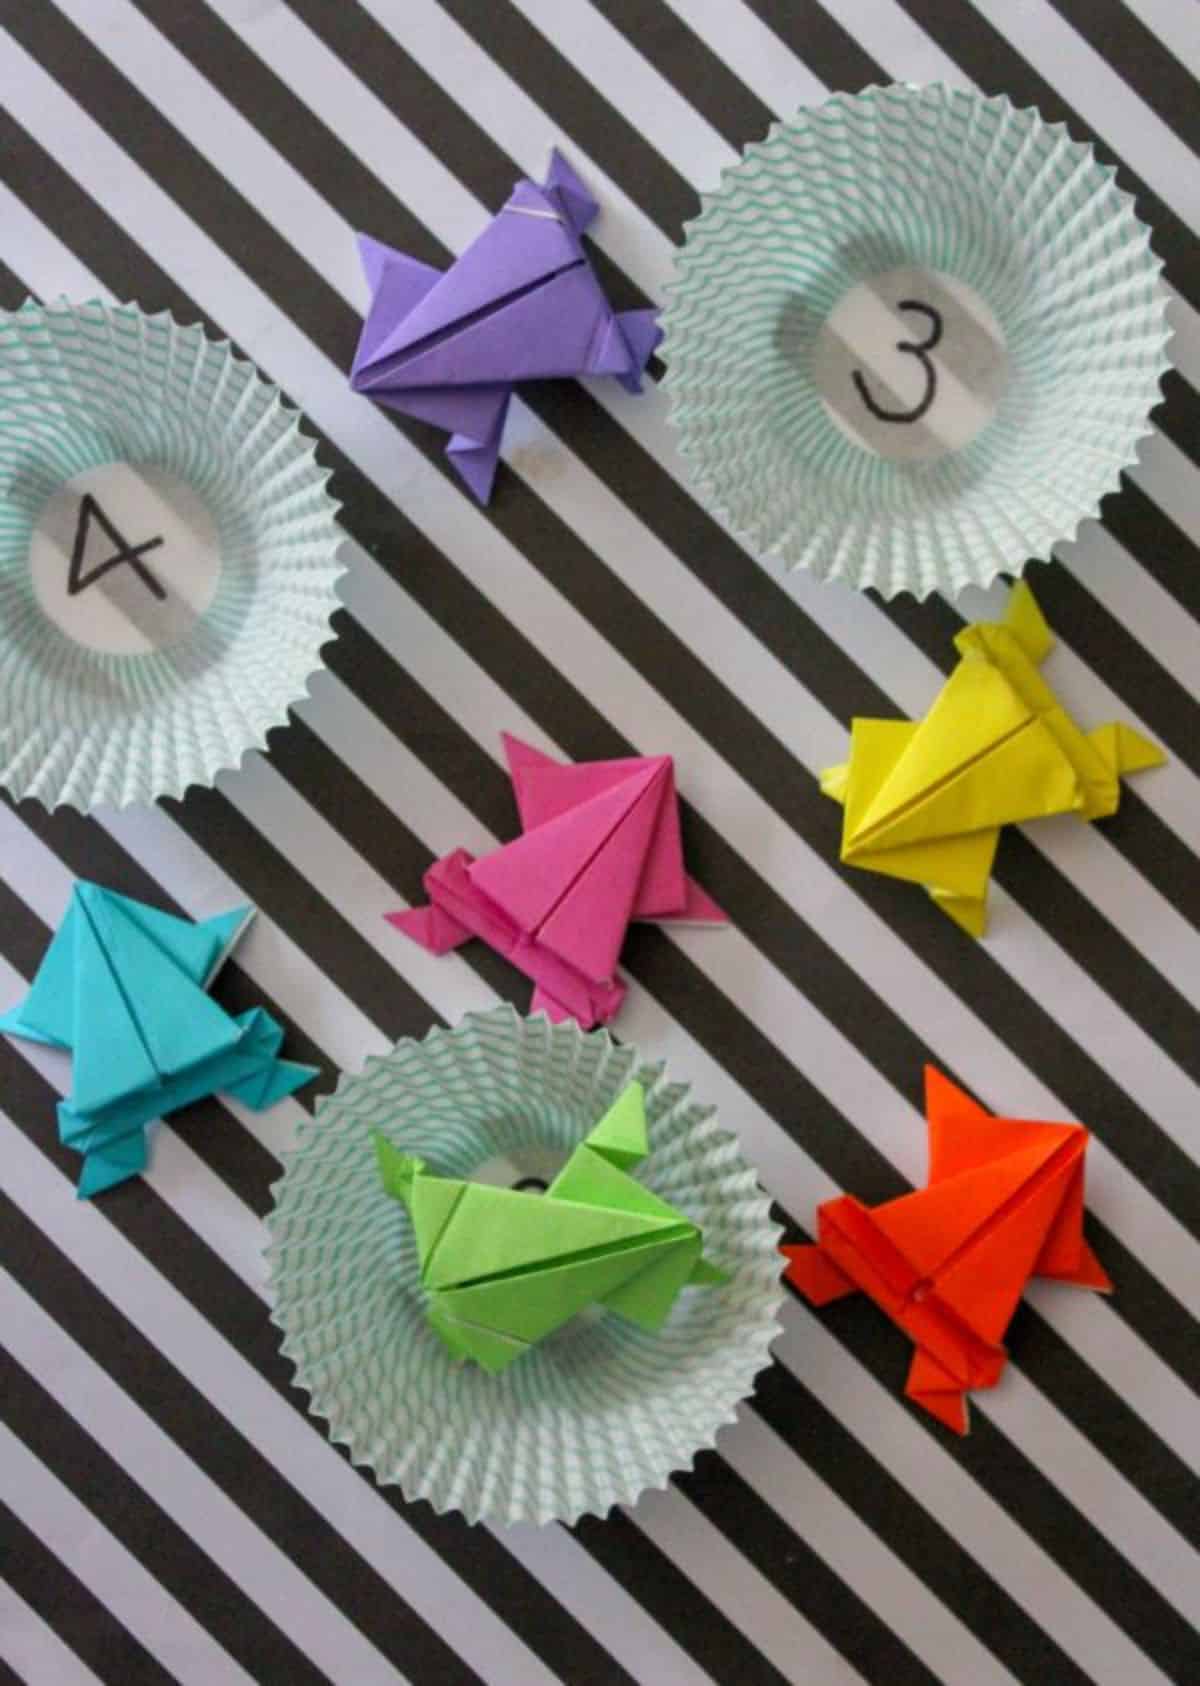 Origami frogs and cupcake liners with numbers written on them on a black and white striped background.